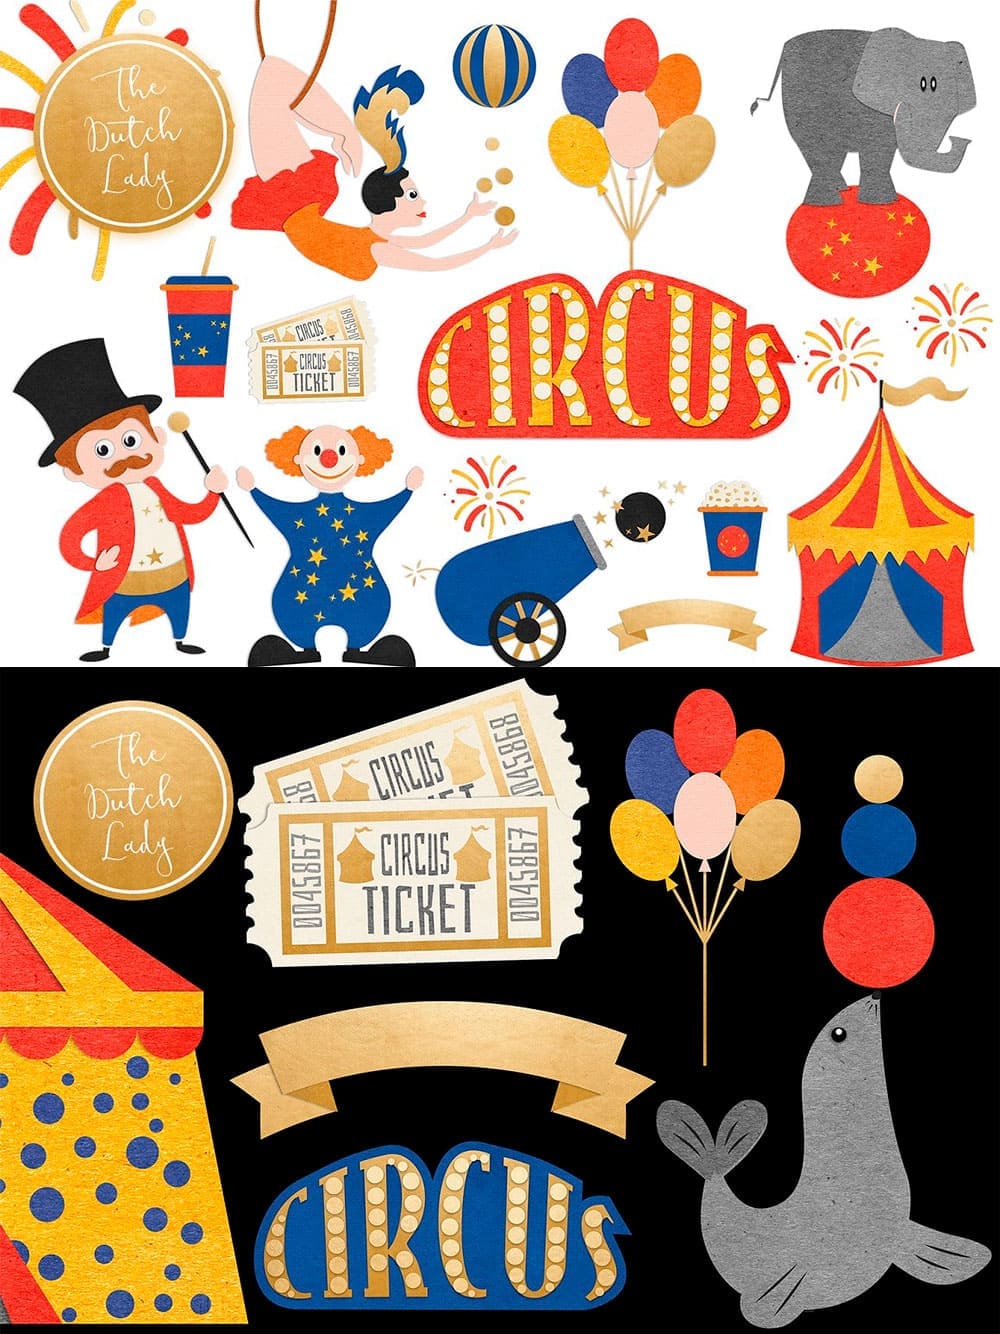 Circus carnival show clipart set, picture for pinterest.